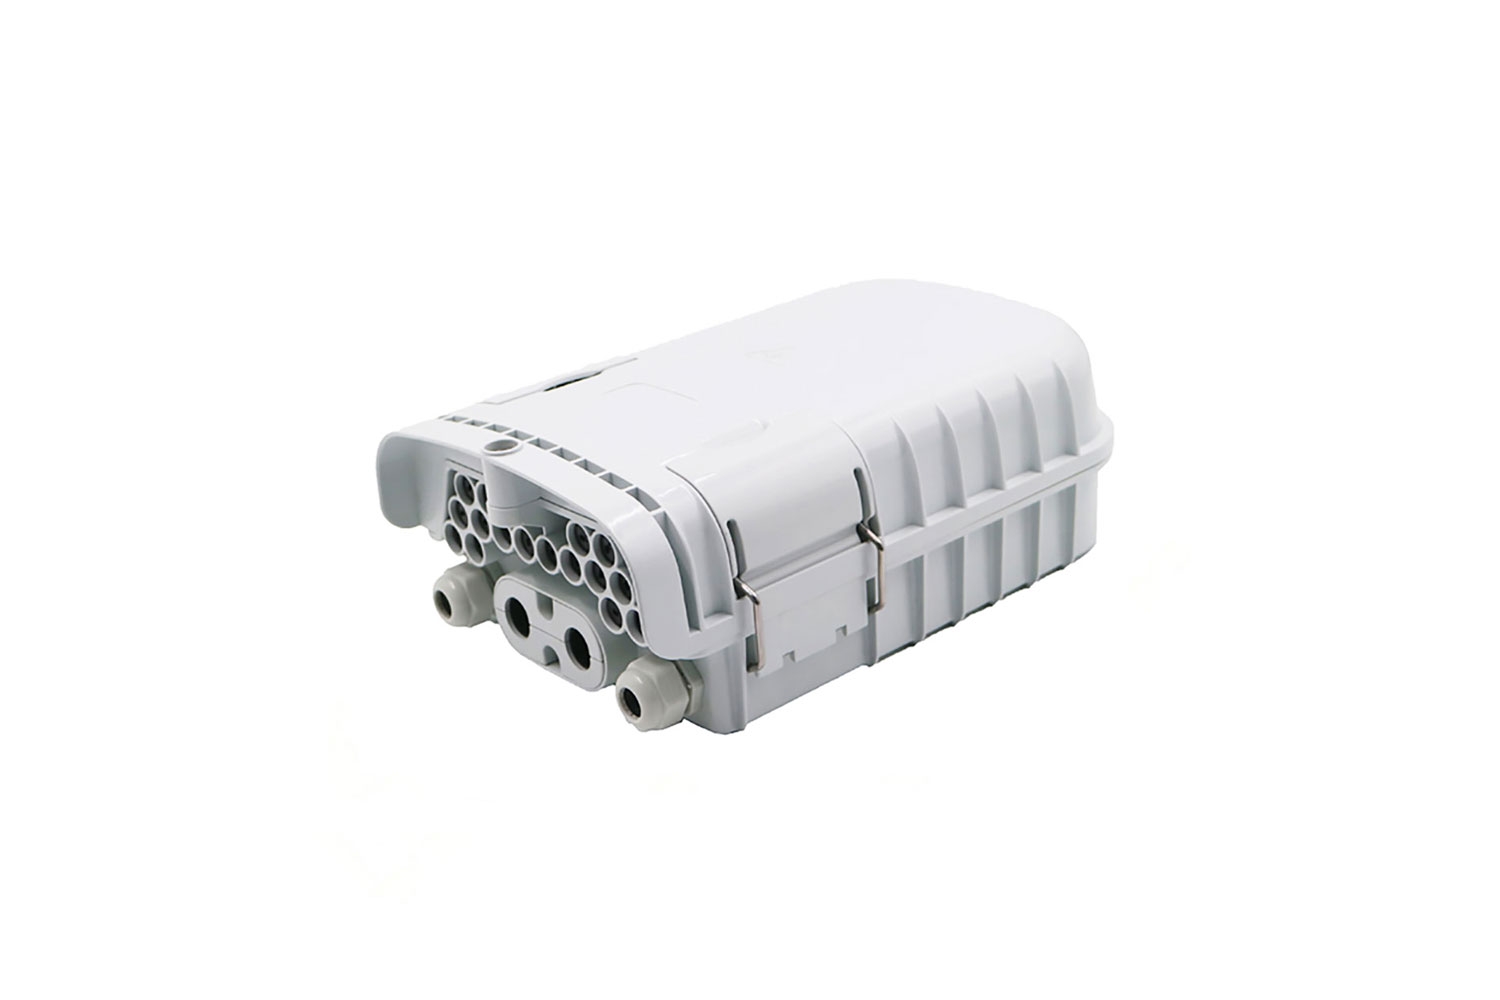 SP 1604 16 Fiber Optic Termination Box With Adapter (5)